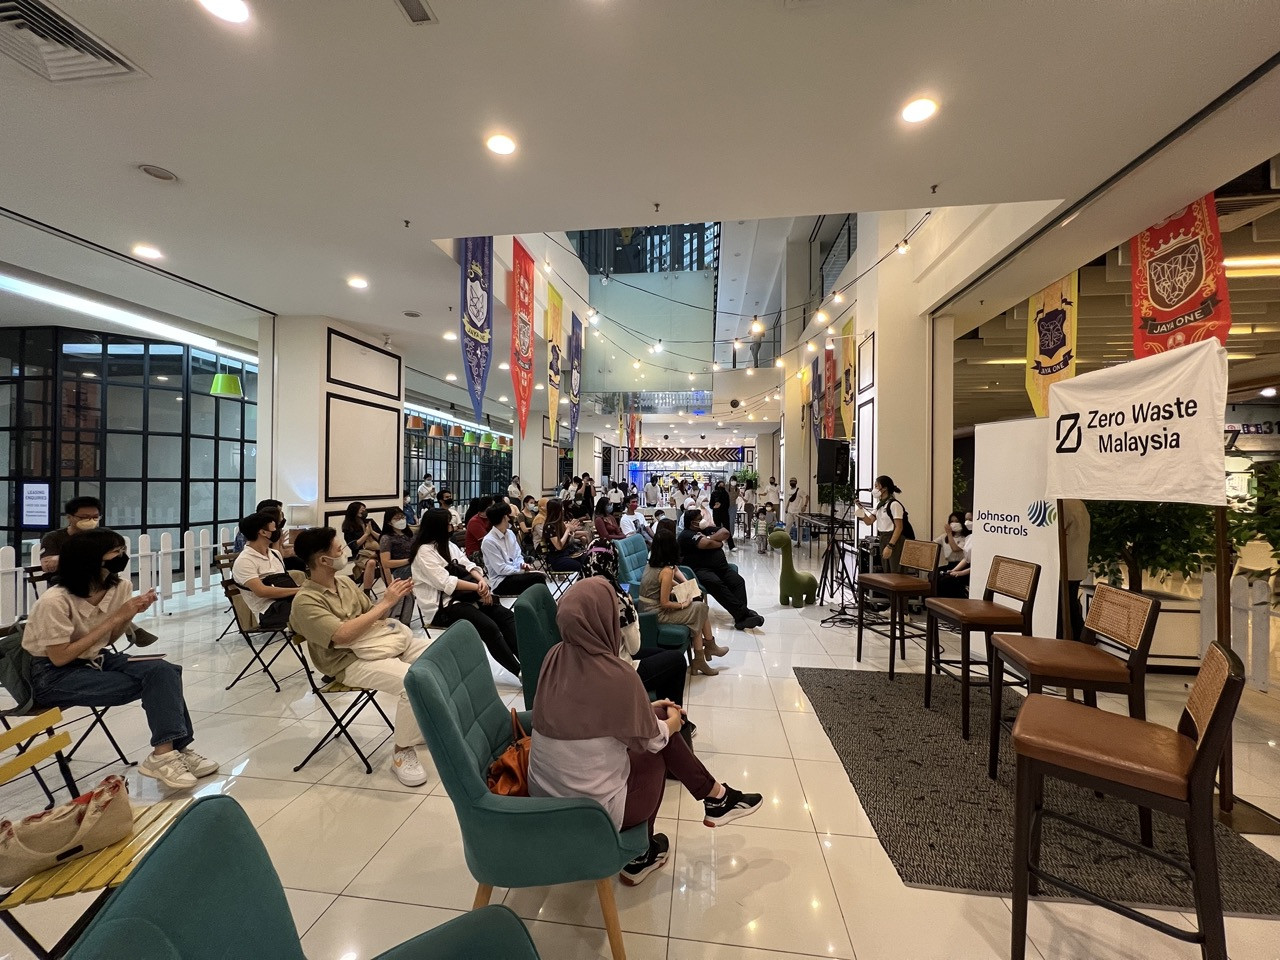 The panel discussion on the state of environmental awareness among Malaysians attracted a high amount of visitors keen on the topic. – Amalina Kamal pic